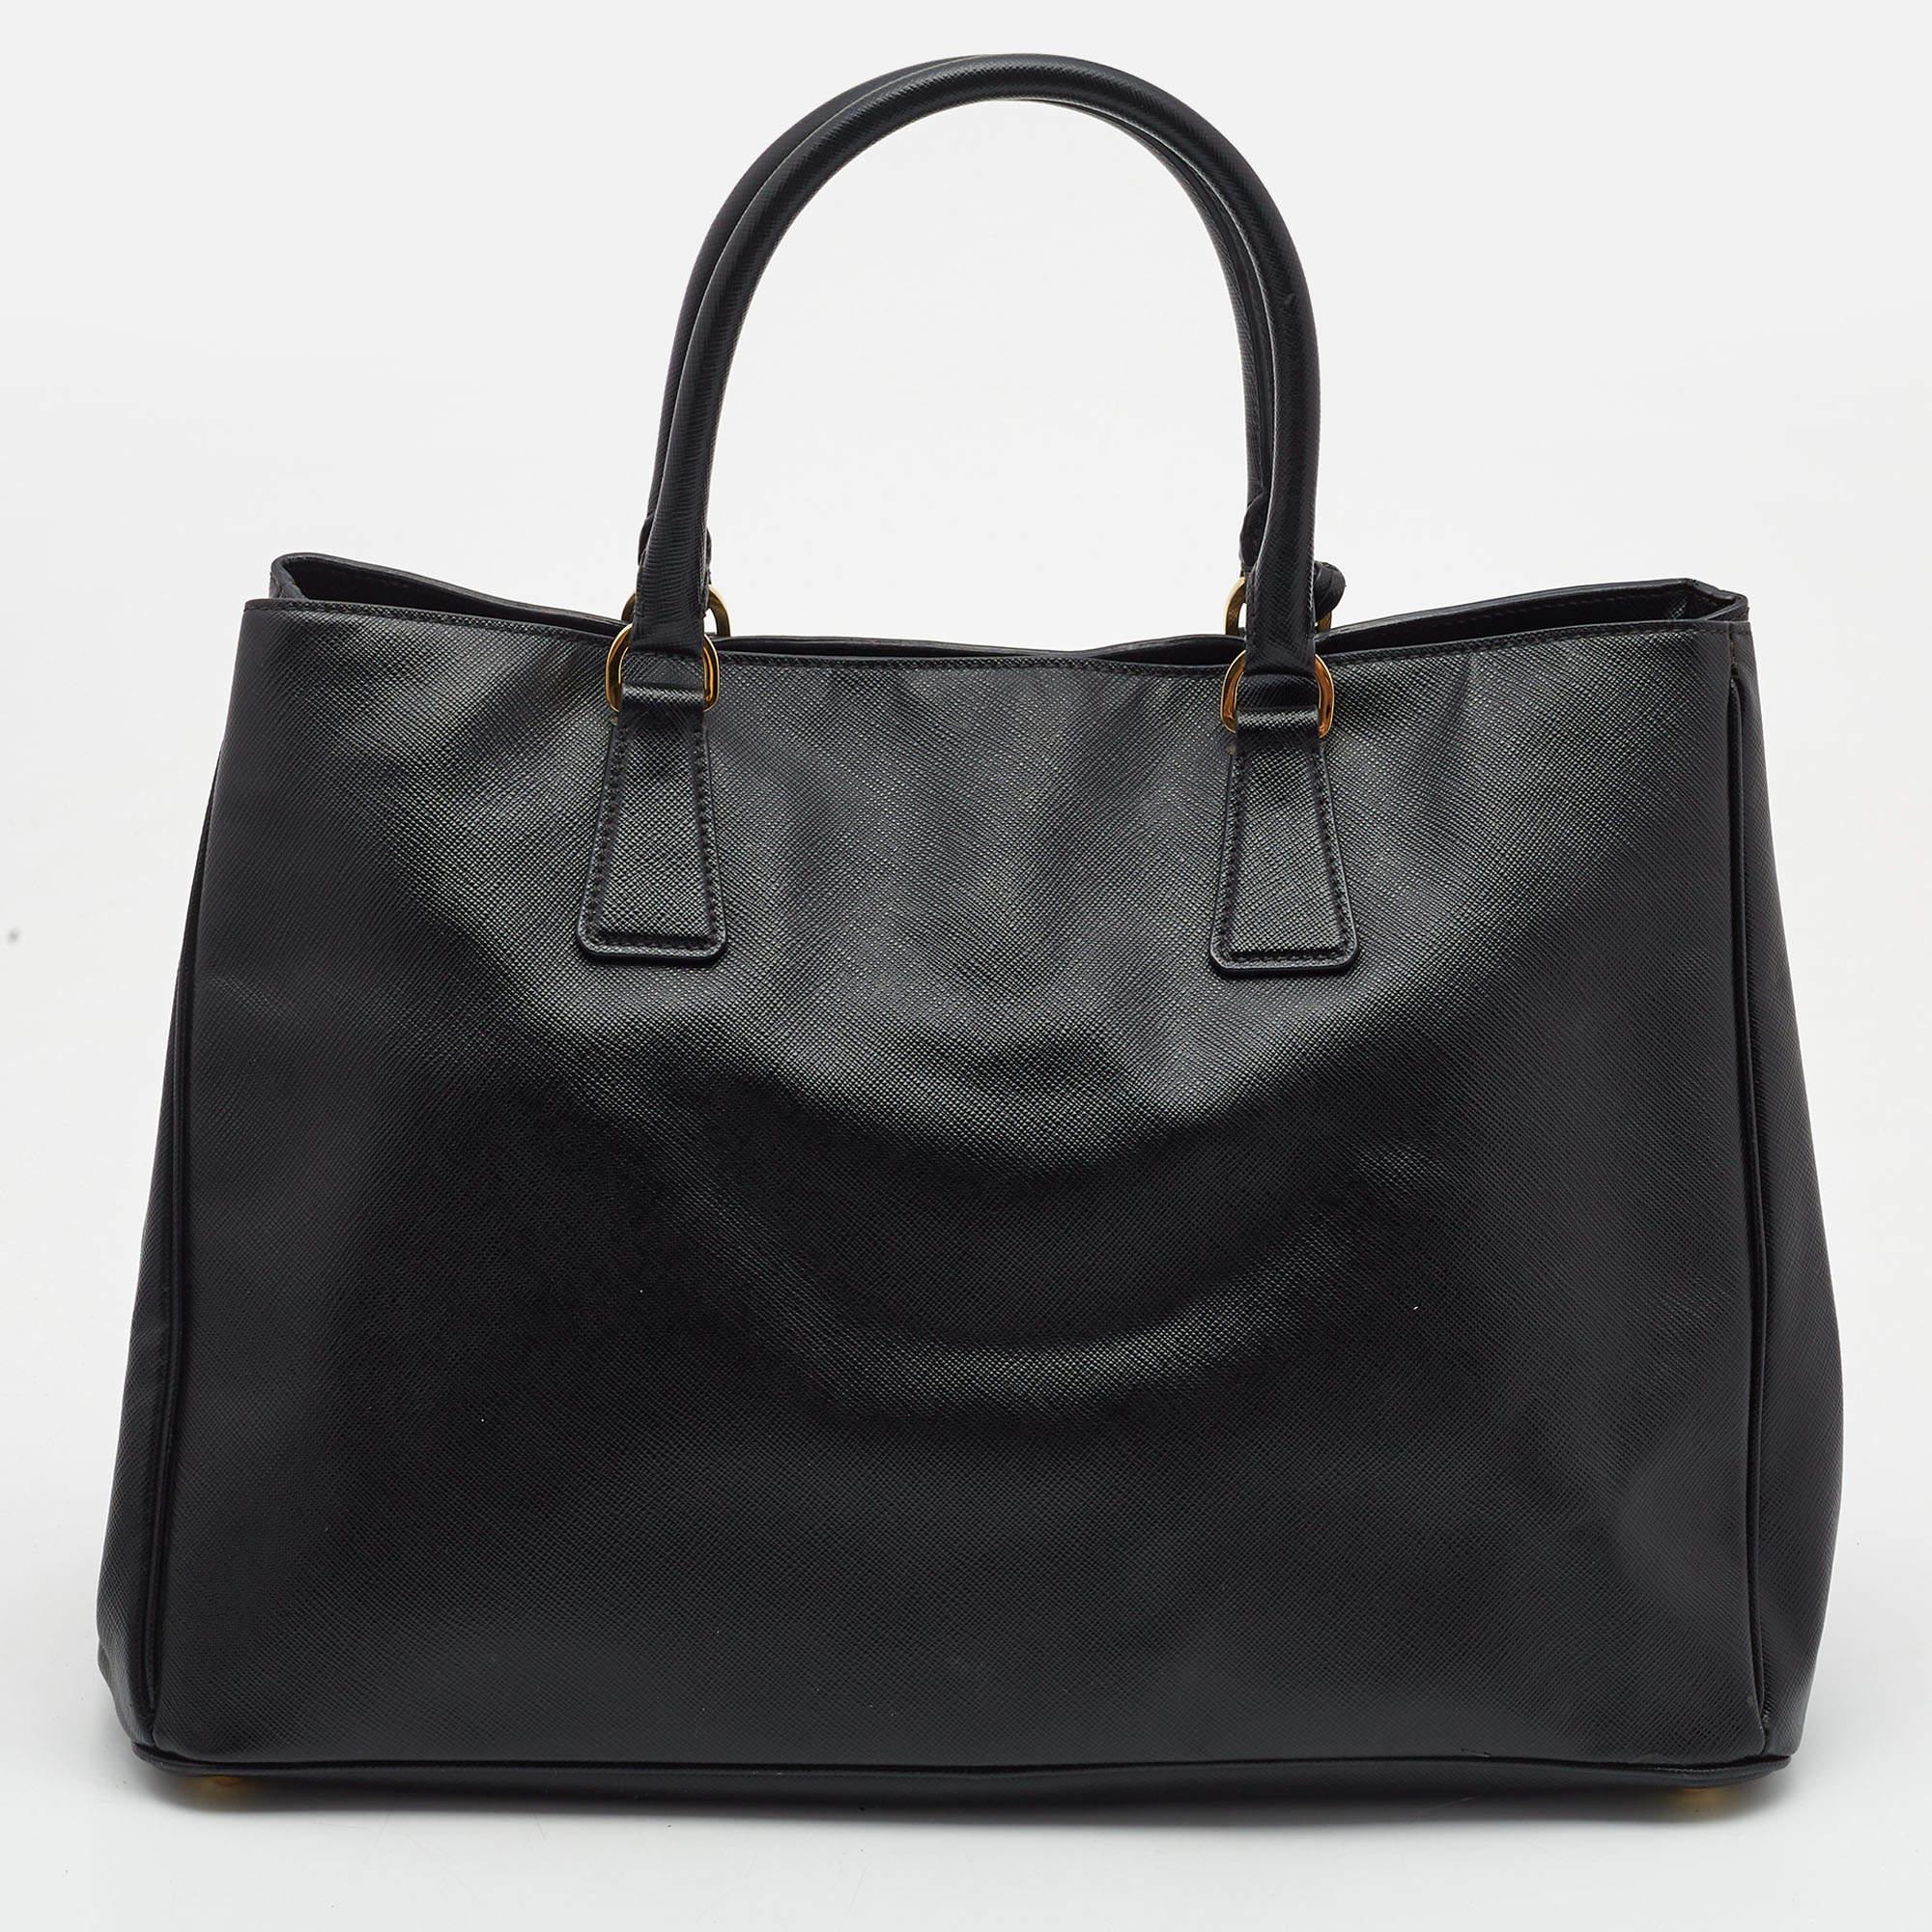 Carry everything you need in style thanks to this Prada leather tote. Crafted from the best materials, this is an accessory that promises enduring style and usage.

Includes: Original Dustbag

 